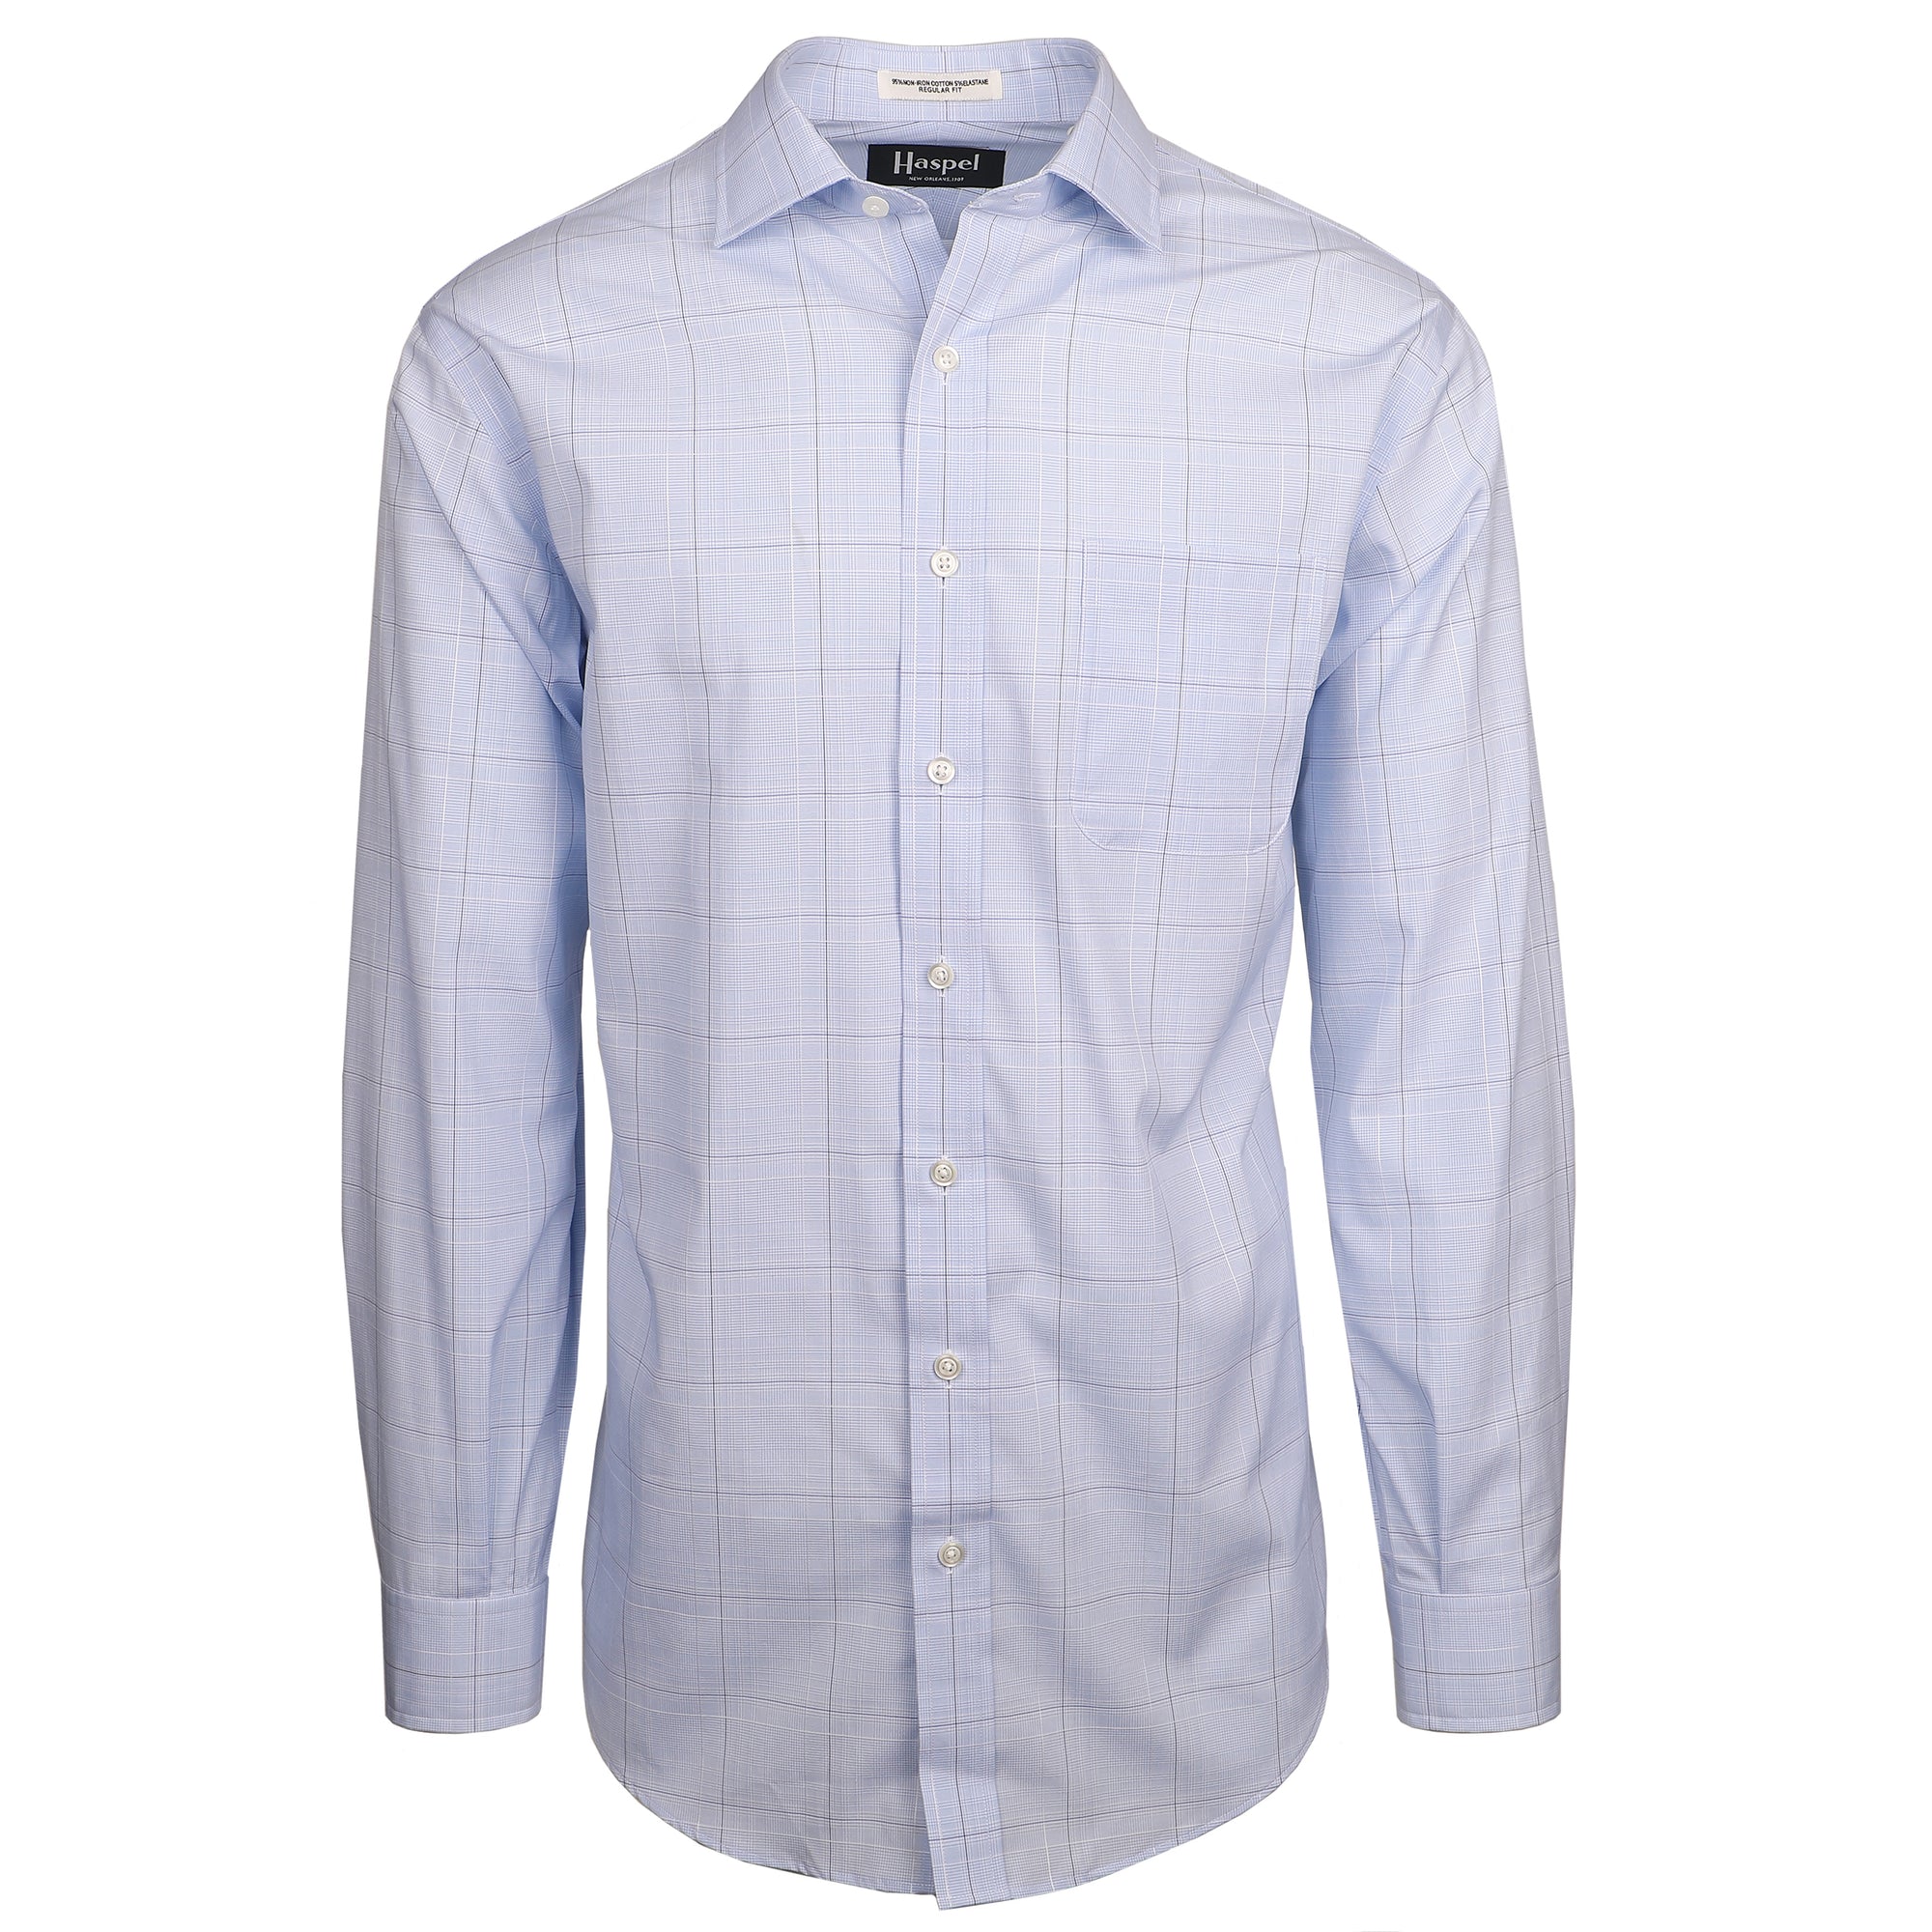 Classic men's dress shirts here that were carefully chosen to pair up with our unique, lightweight men's suits.  100% Imported Combed Cotton  •  80's 2-Ply/Non-Iron Pinpoint Fabric  •  Point Collar  •  Long Sleeve, Button Cuff